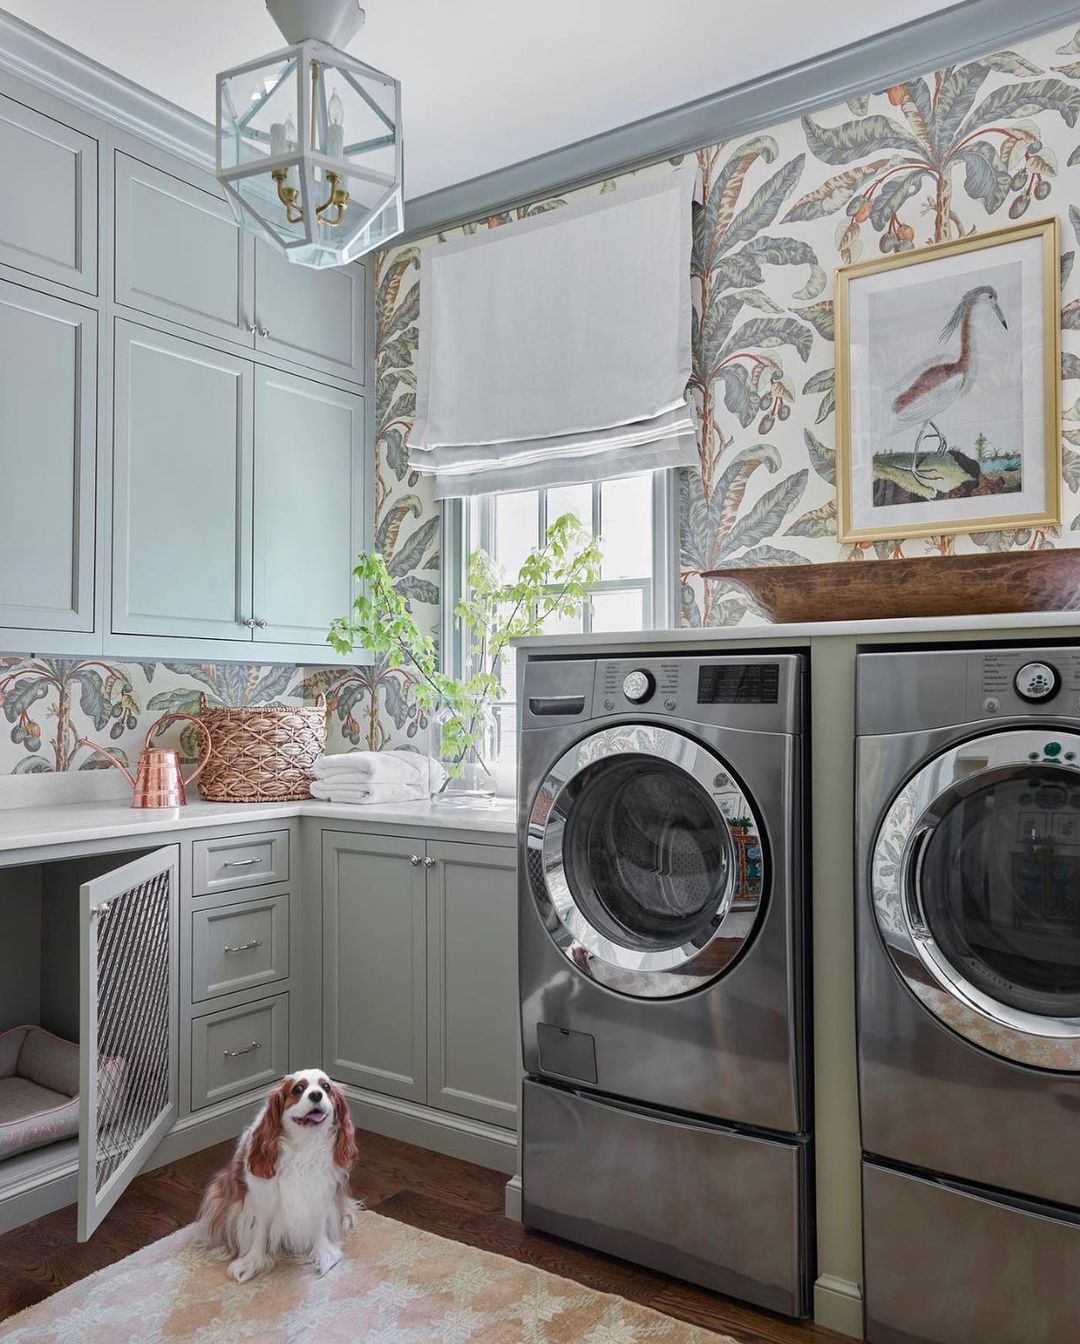 Nature-Inspired Elegance in the Laundry Room